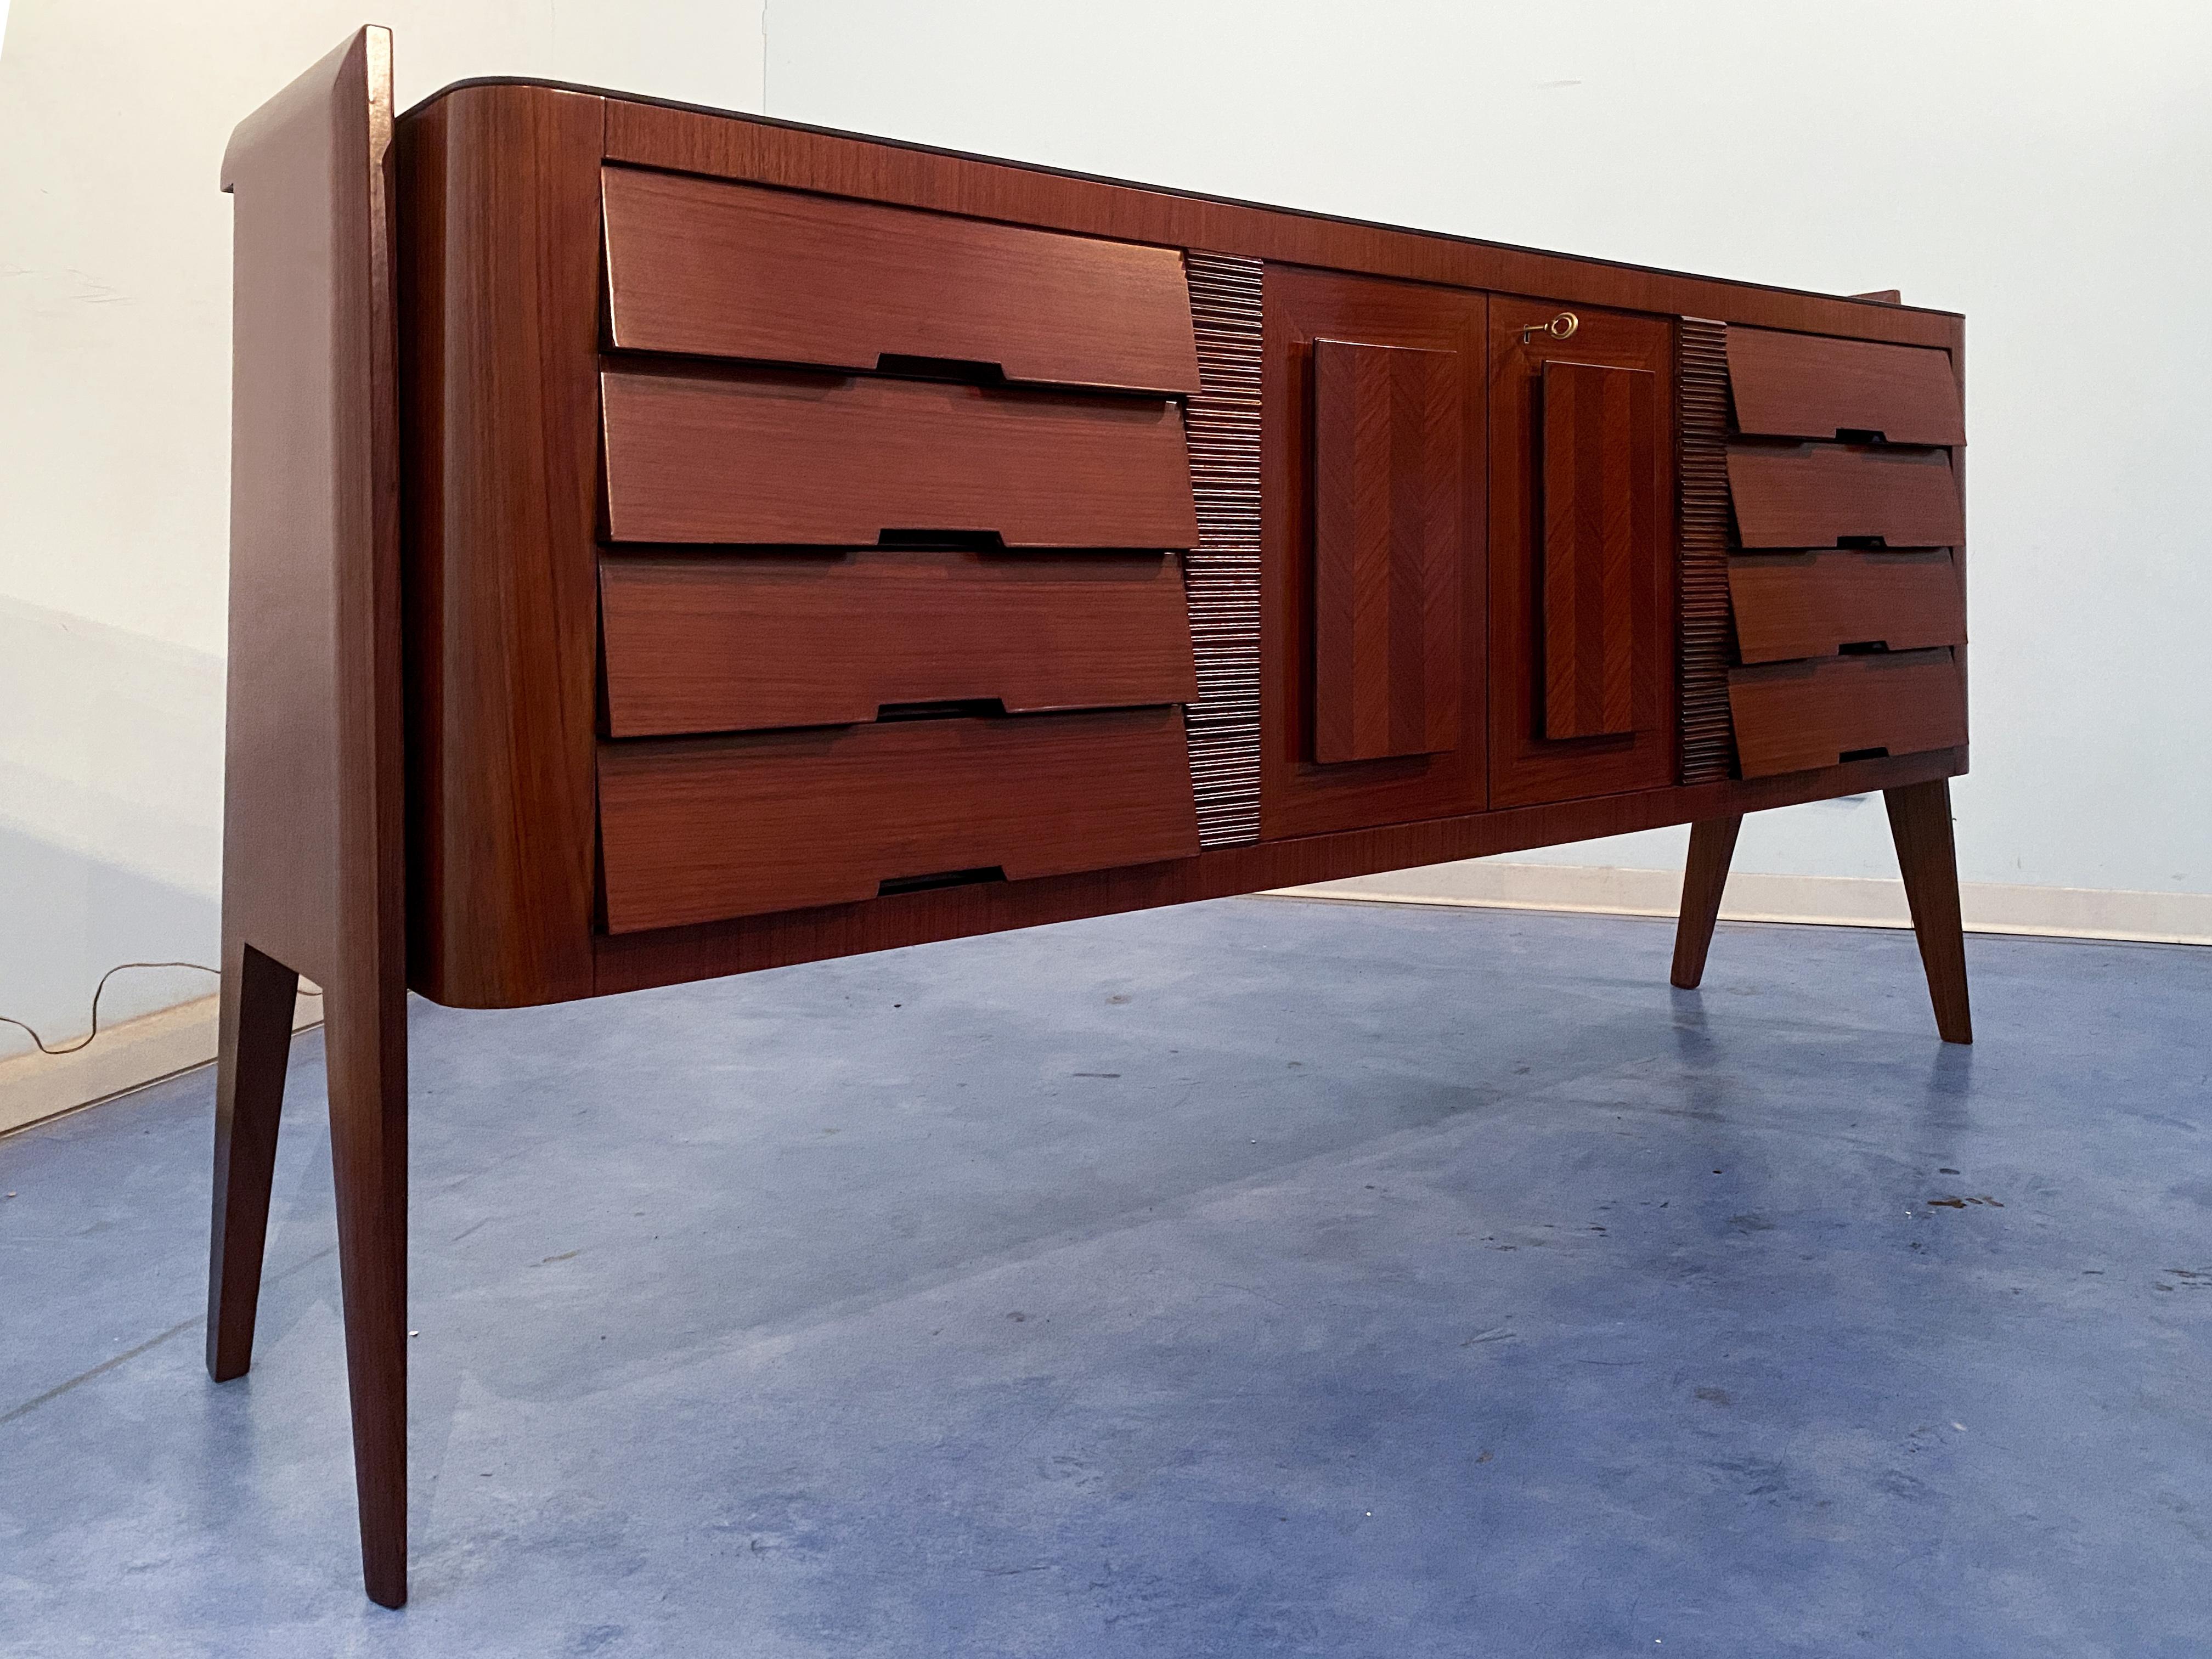 The Italian credenza or sideboard bar by Vittorio Dassi is a refined piece of furniture, featuring a glass top and maple interiors. The front is made up of eight drawers and two doors, and it has been crafted with great attention to execution